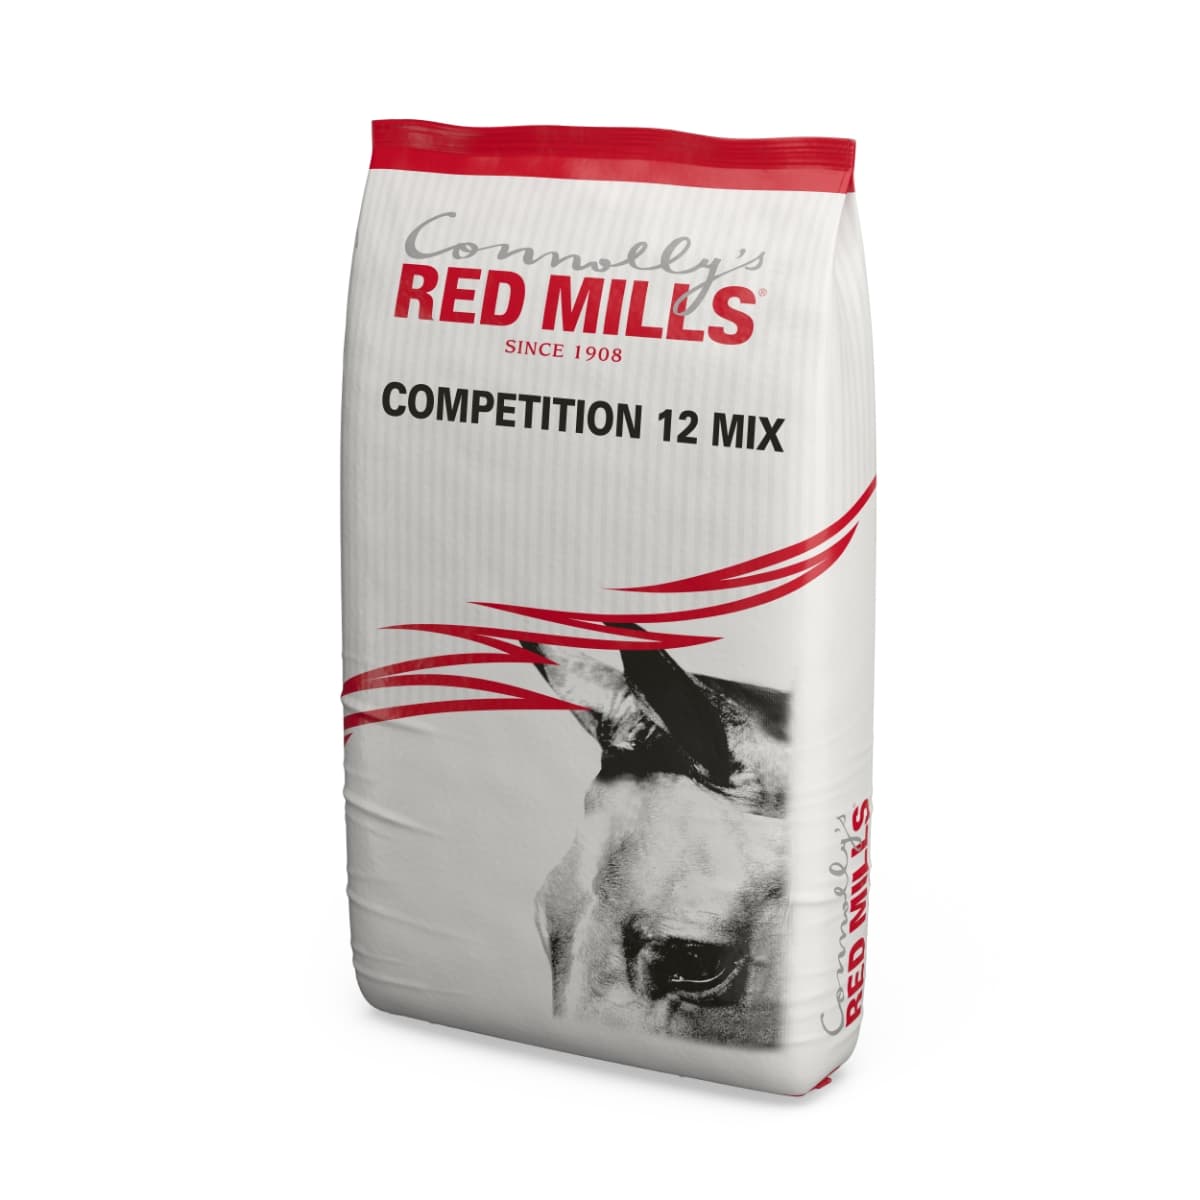 RED MILLS Competition 12 Mix